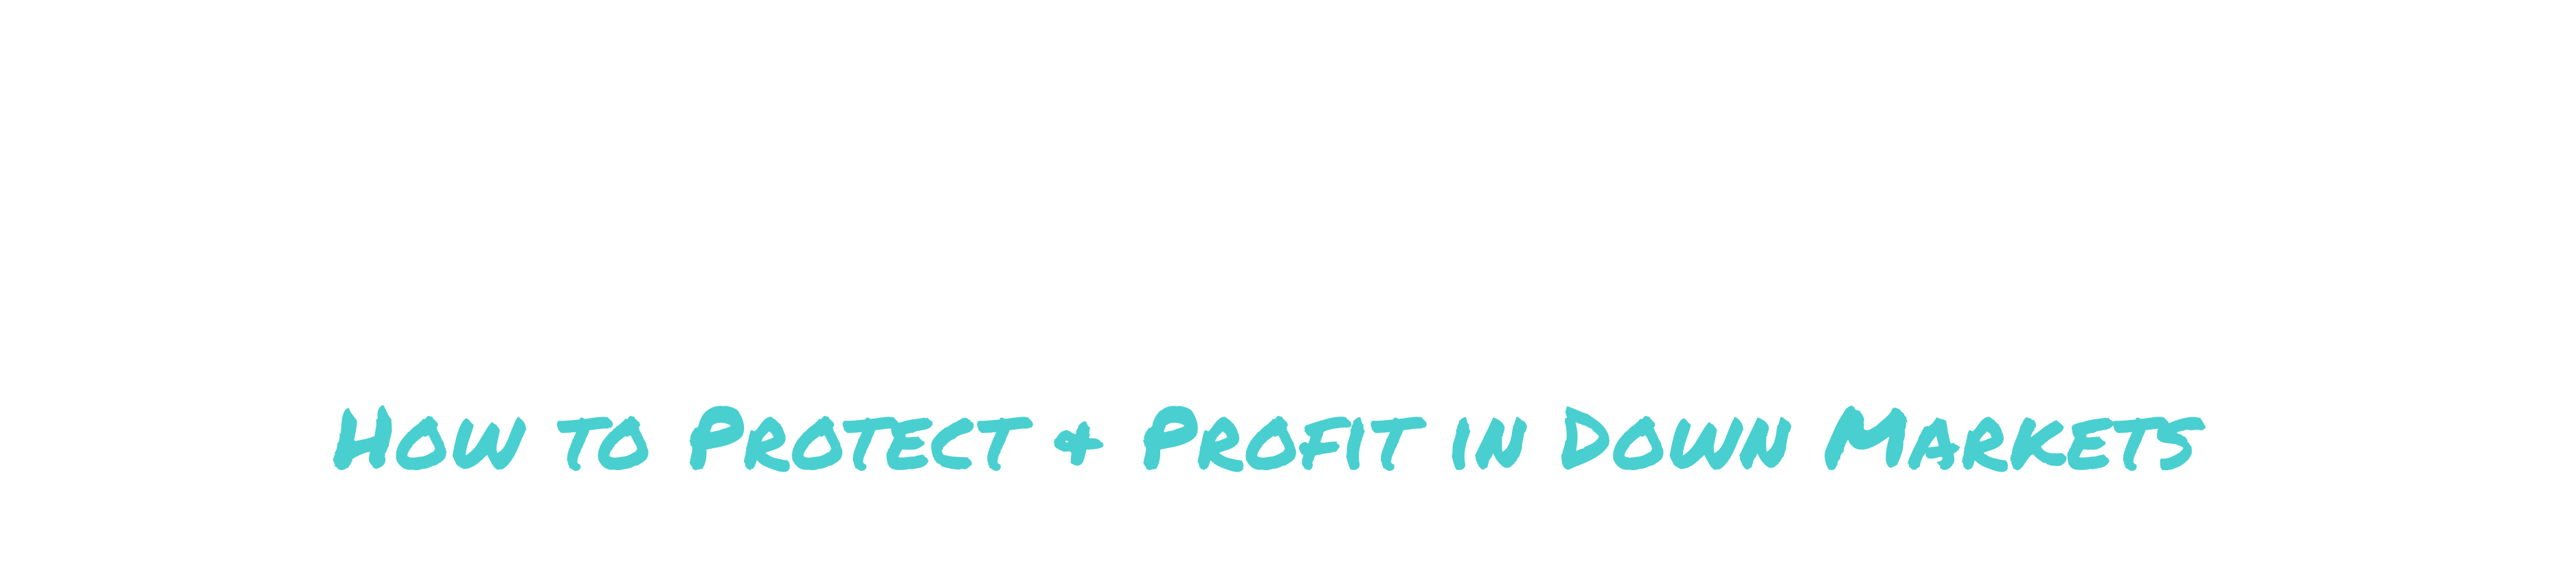 How to Protect & Profit in Down Markets: Value $95